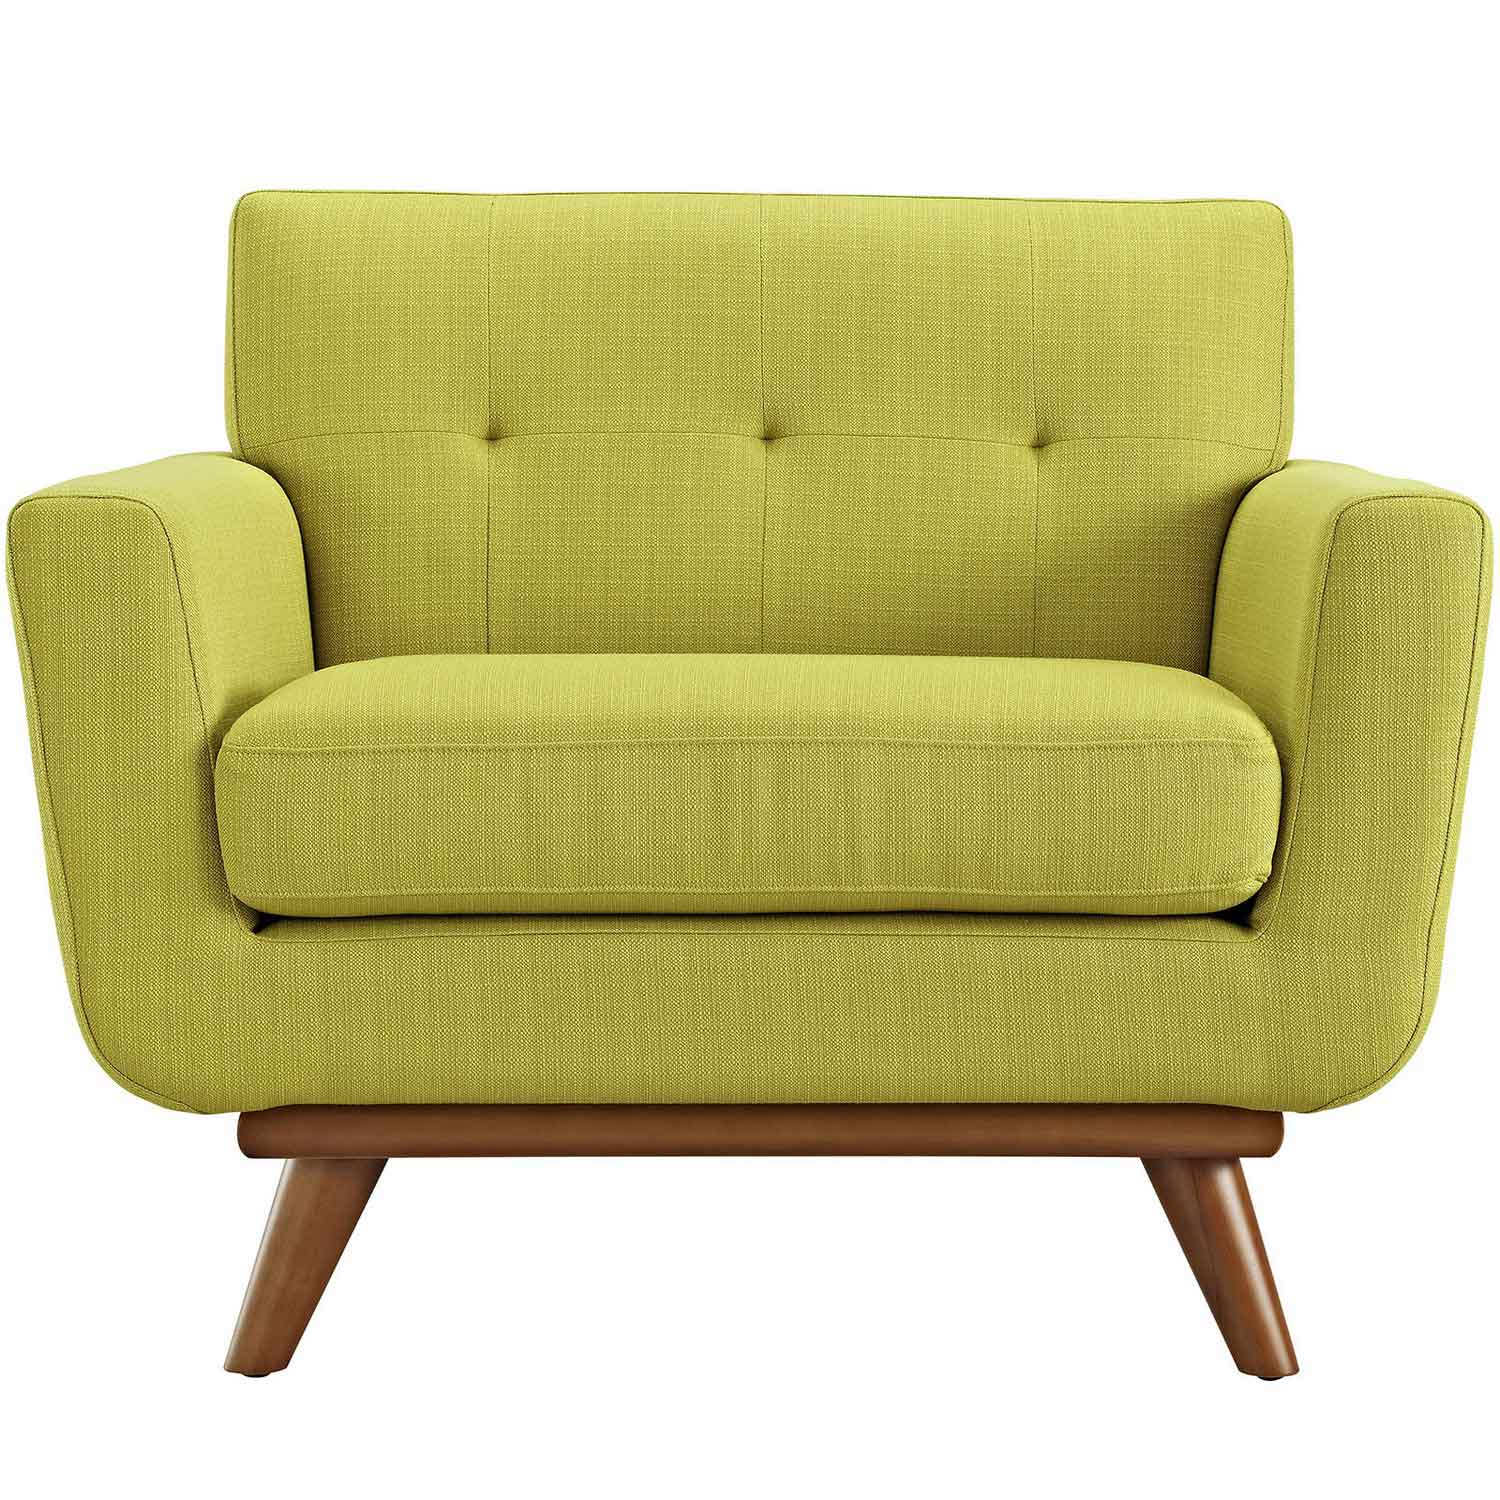 Modway Engage Upholstered Armchair - Wheatgrass